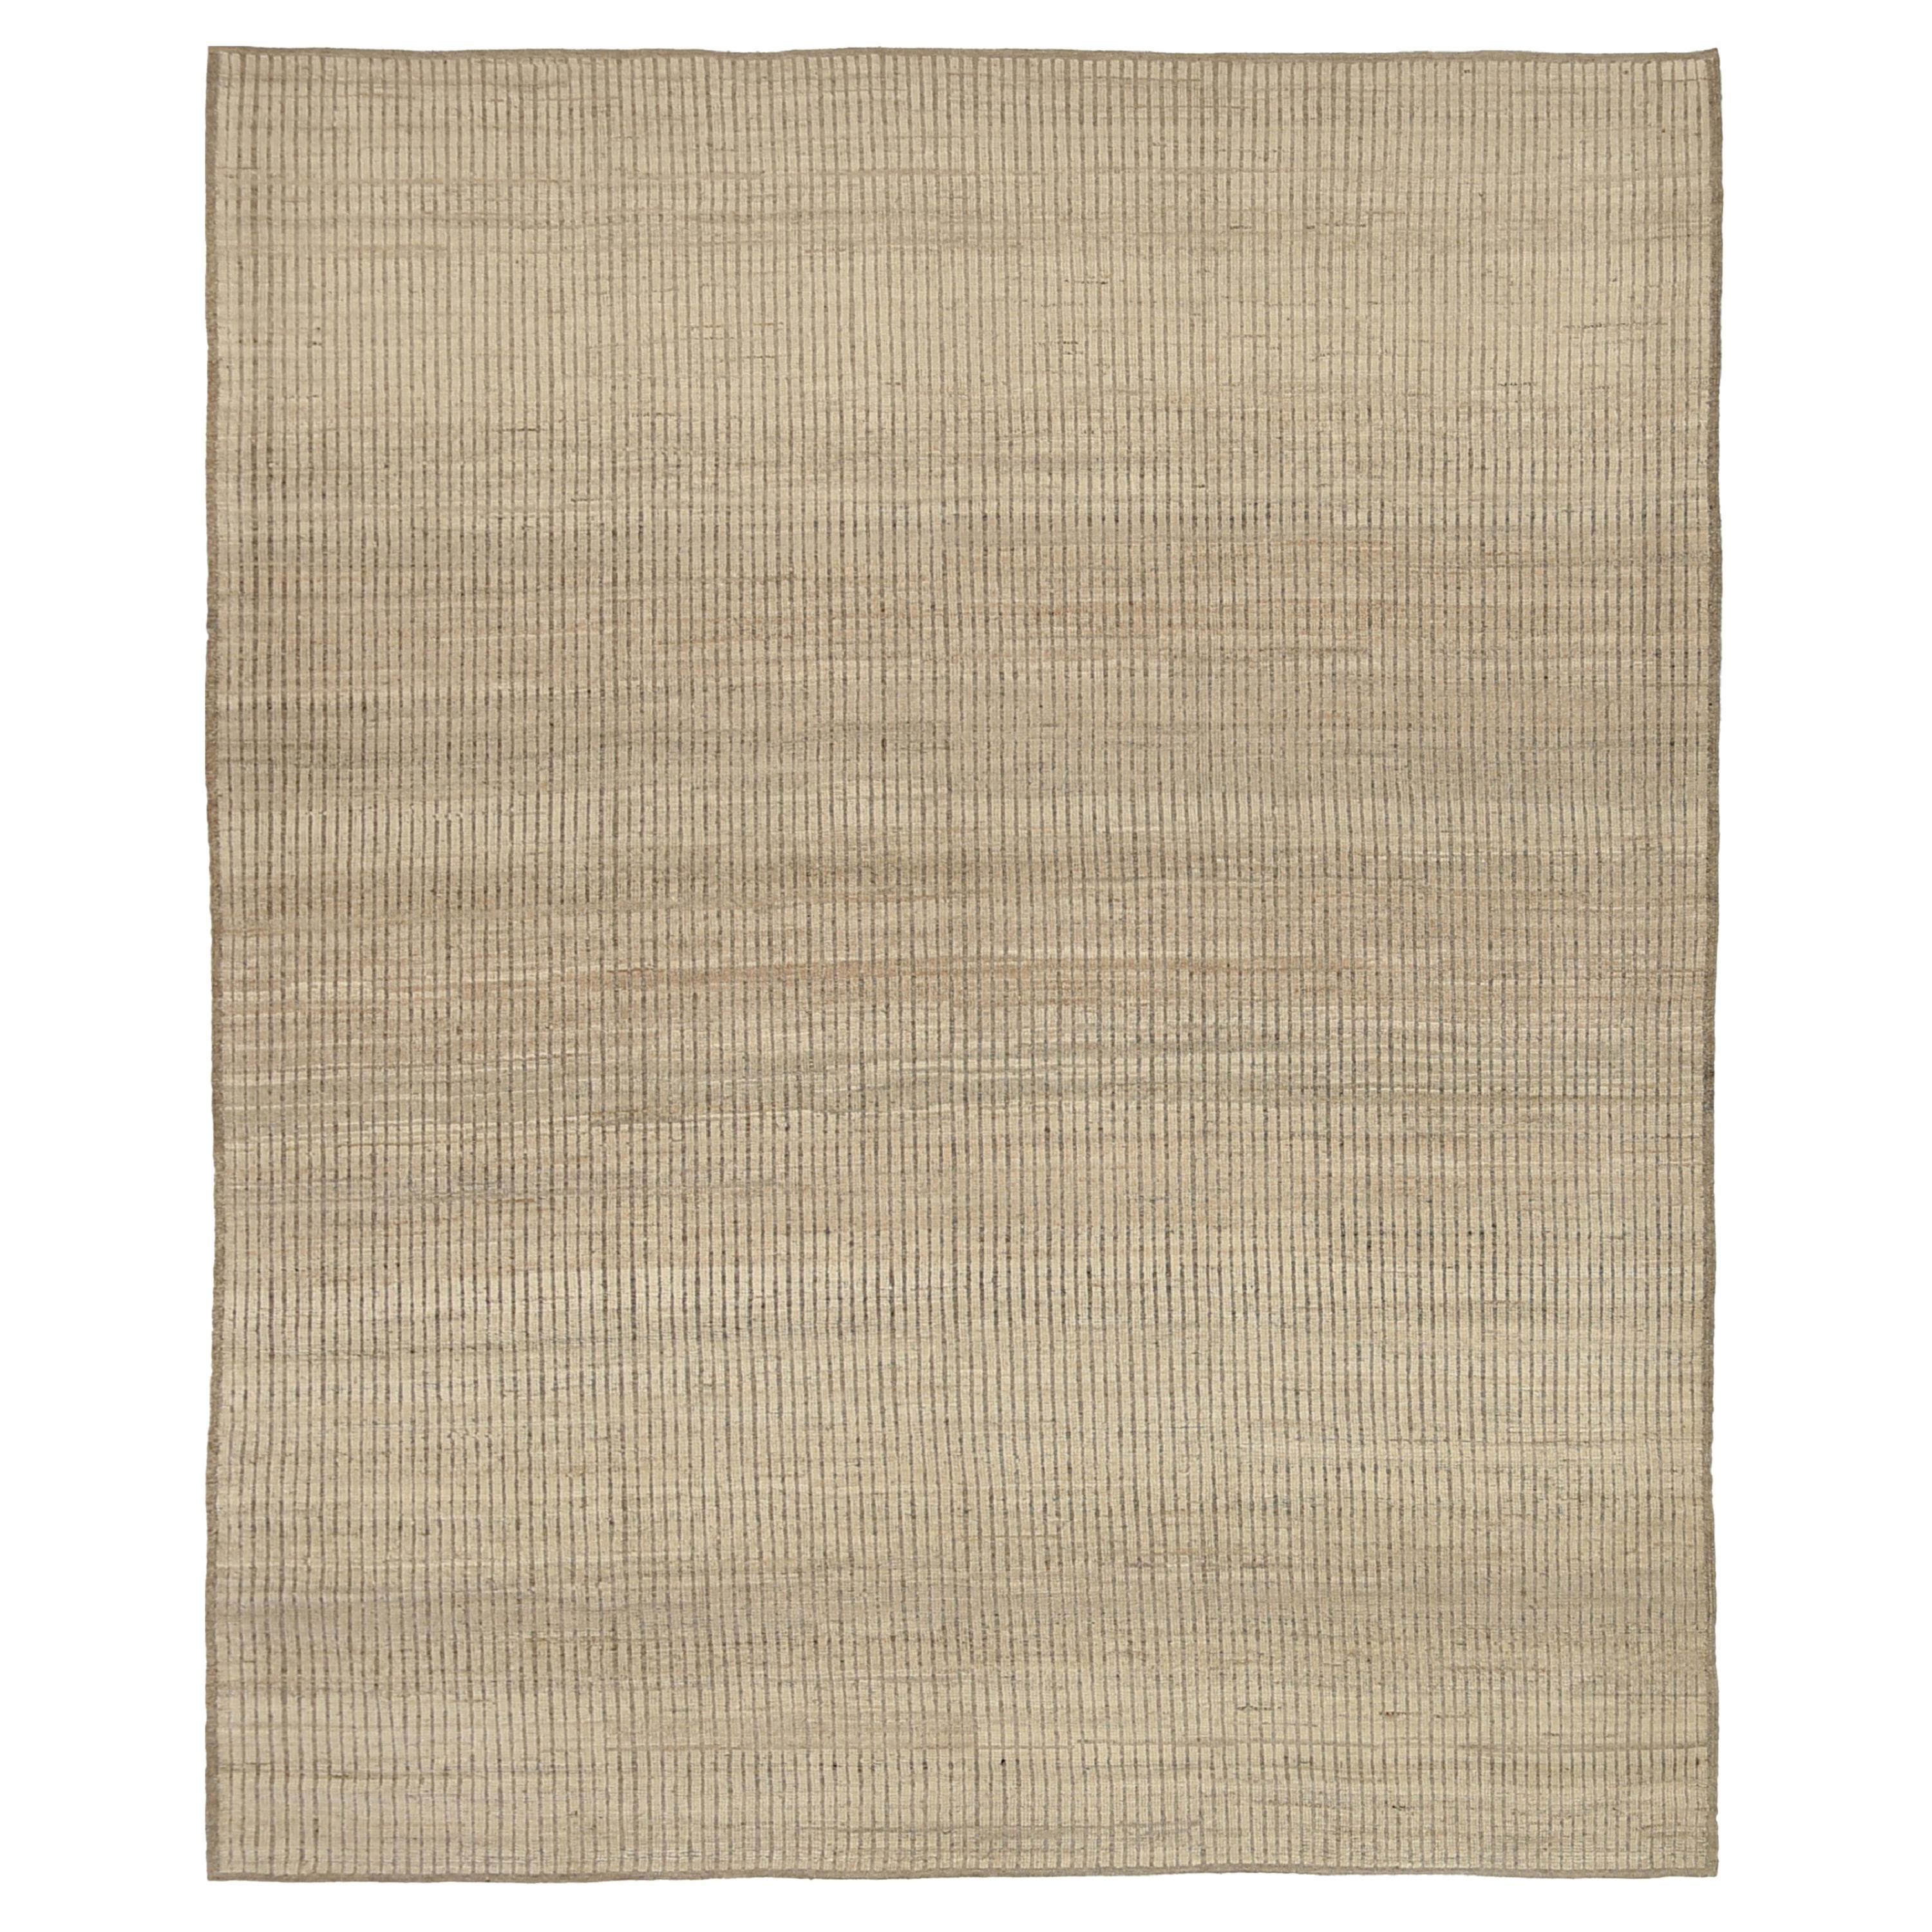 Nazmiyal Collection Soft Neutral Modern Distressed Rug  9 ft 9 in x 12 ft